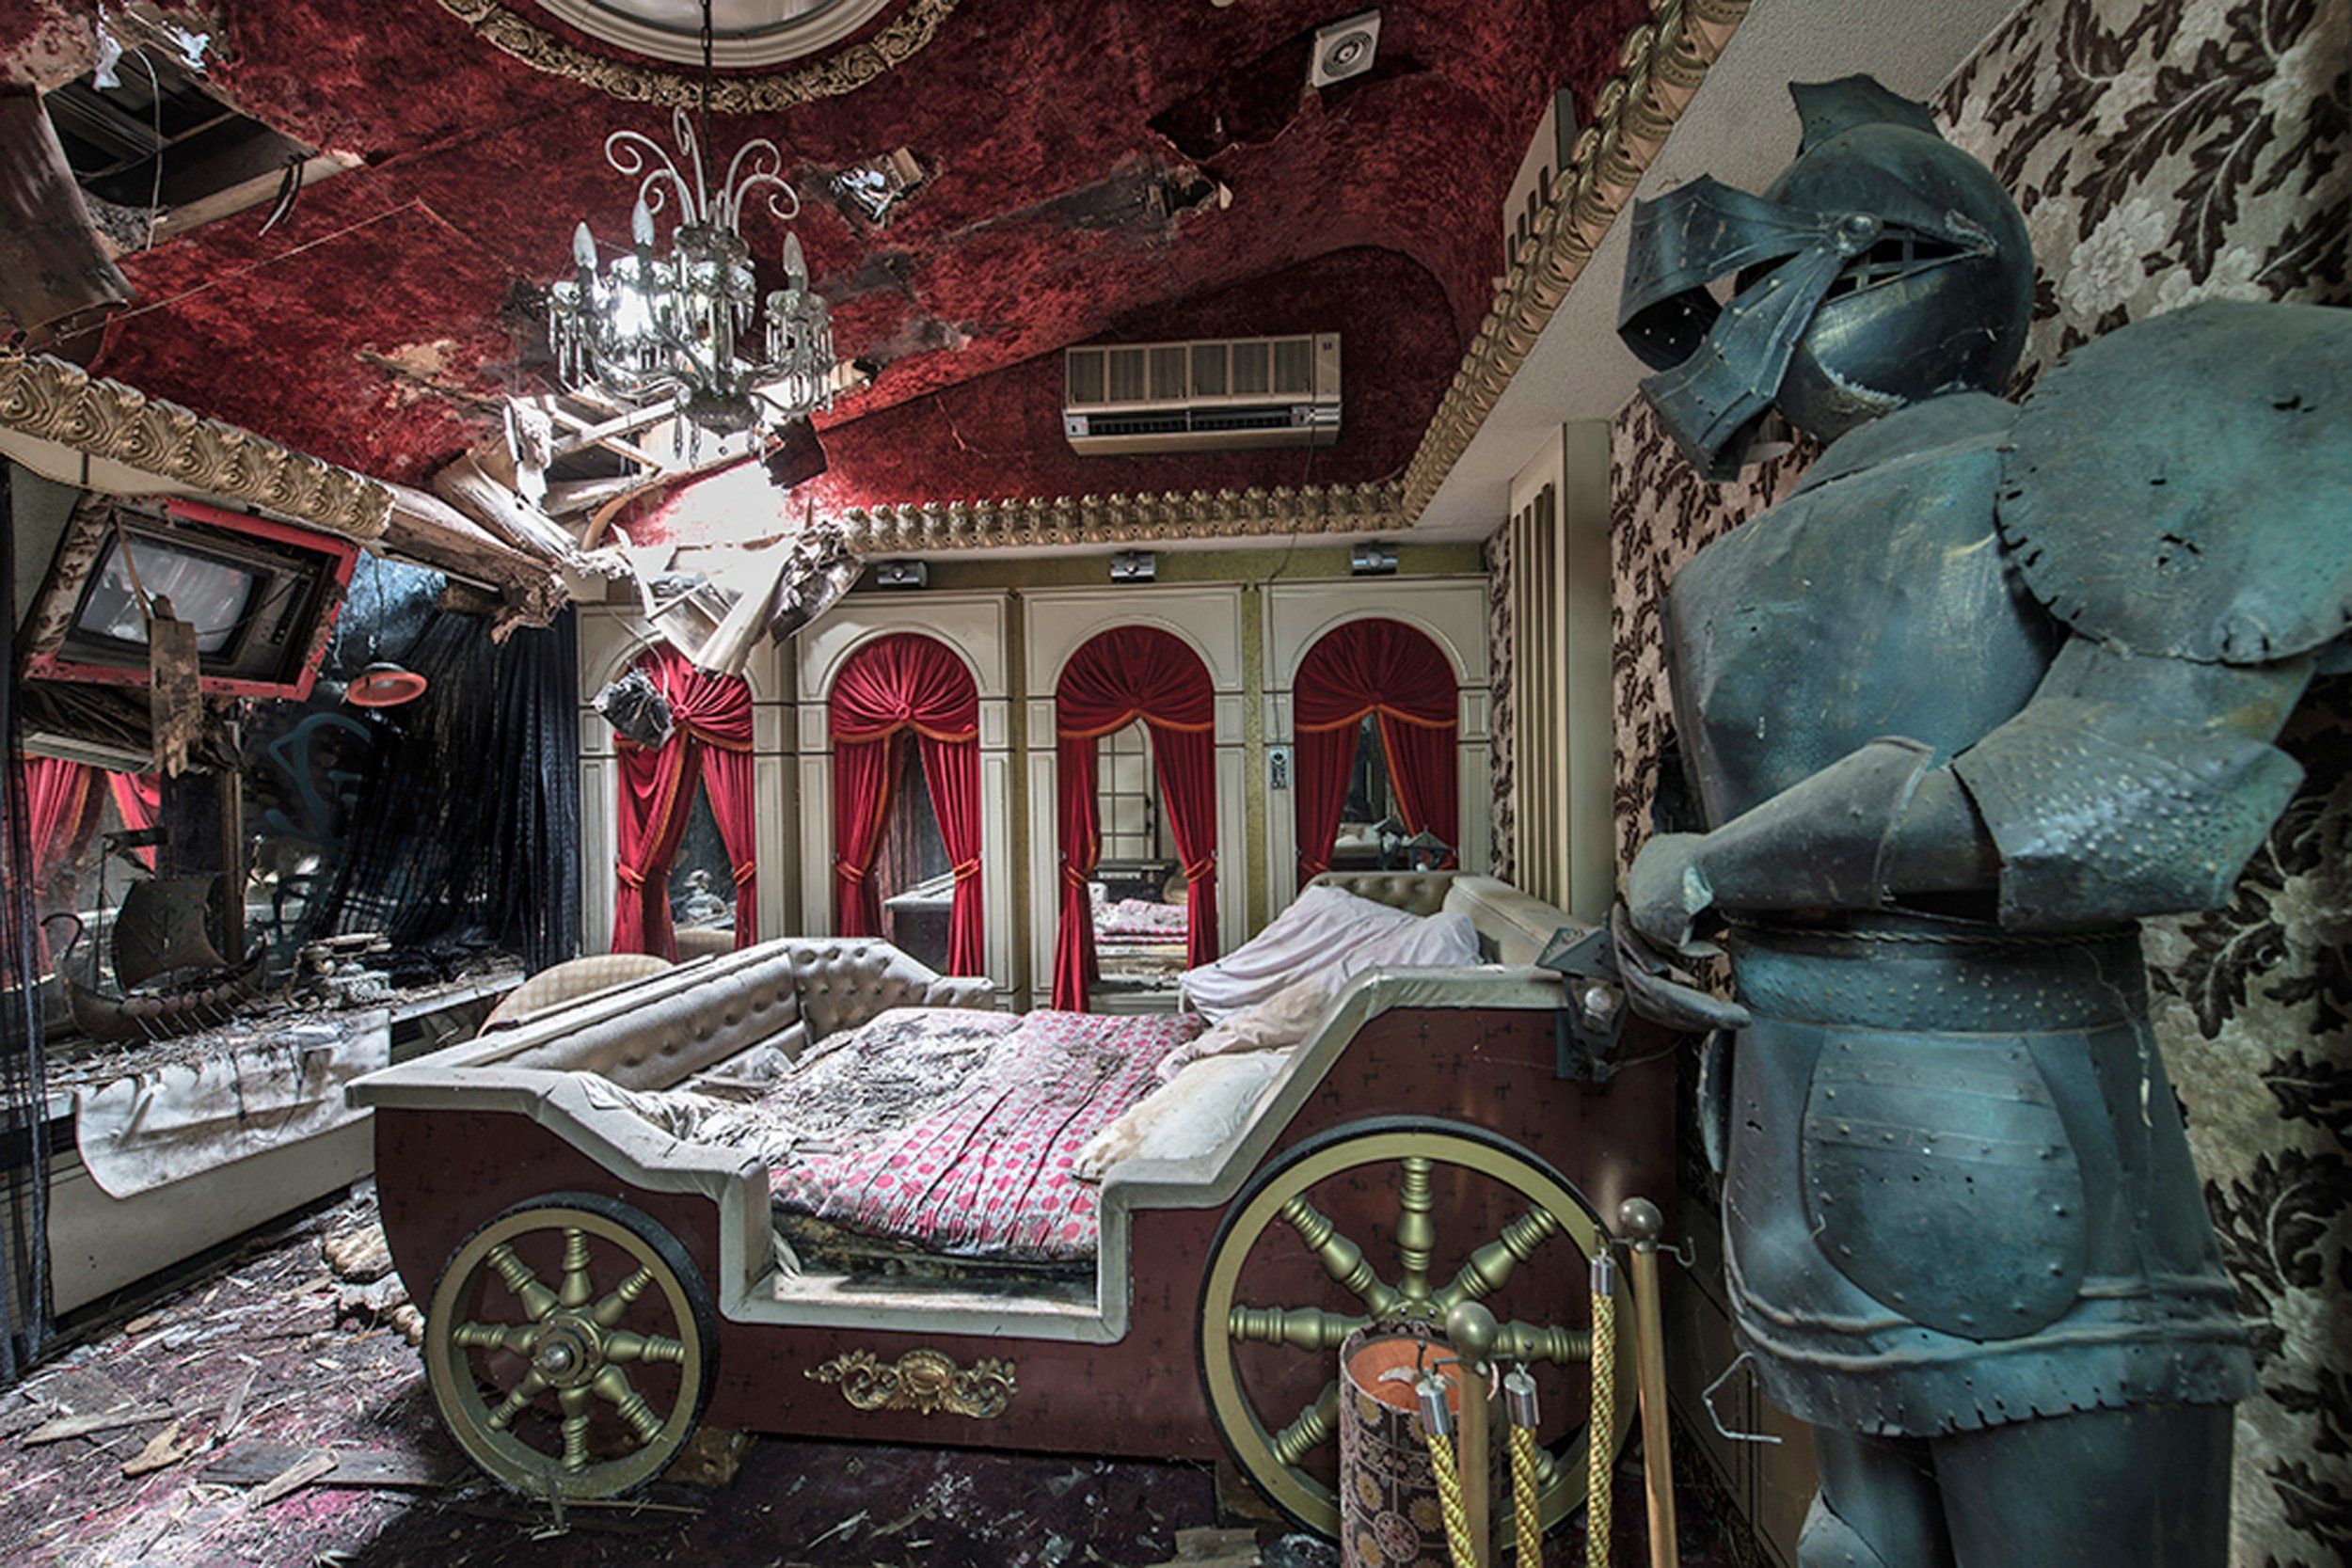 One of the most intricate and elaborate rooms is a Medieval-themed suite.